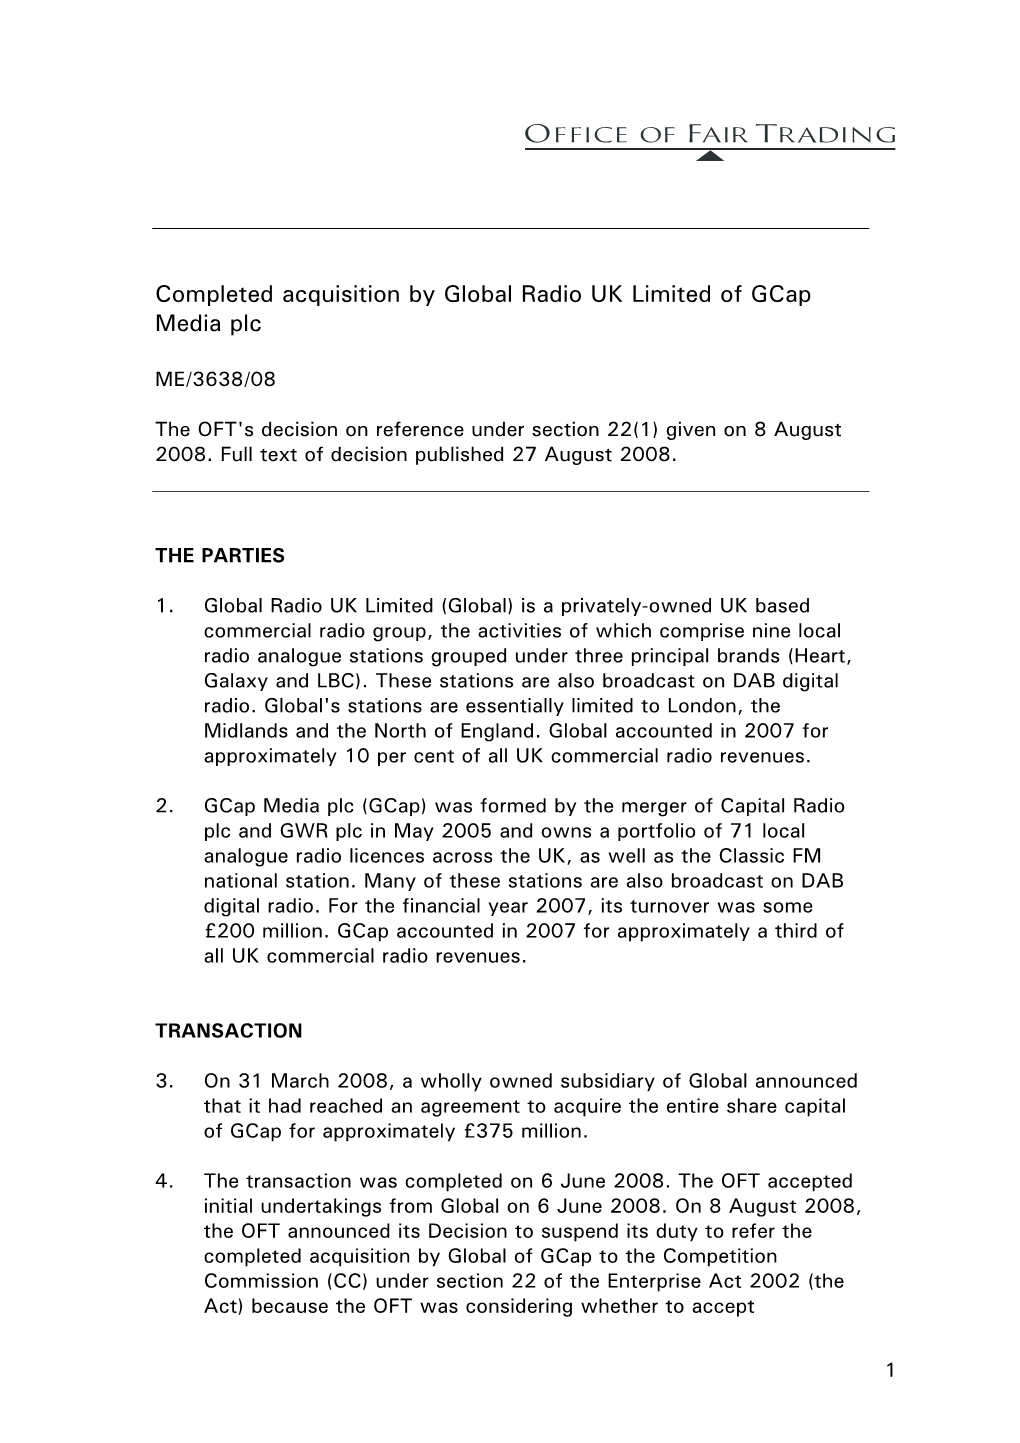 Completed Acquisition by Global Radio UK Limited of Gcap Media Plc